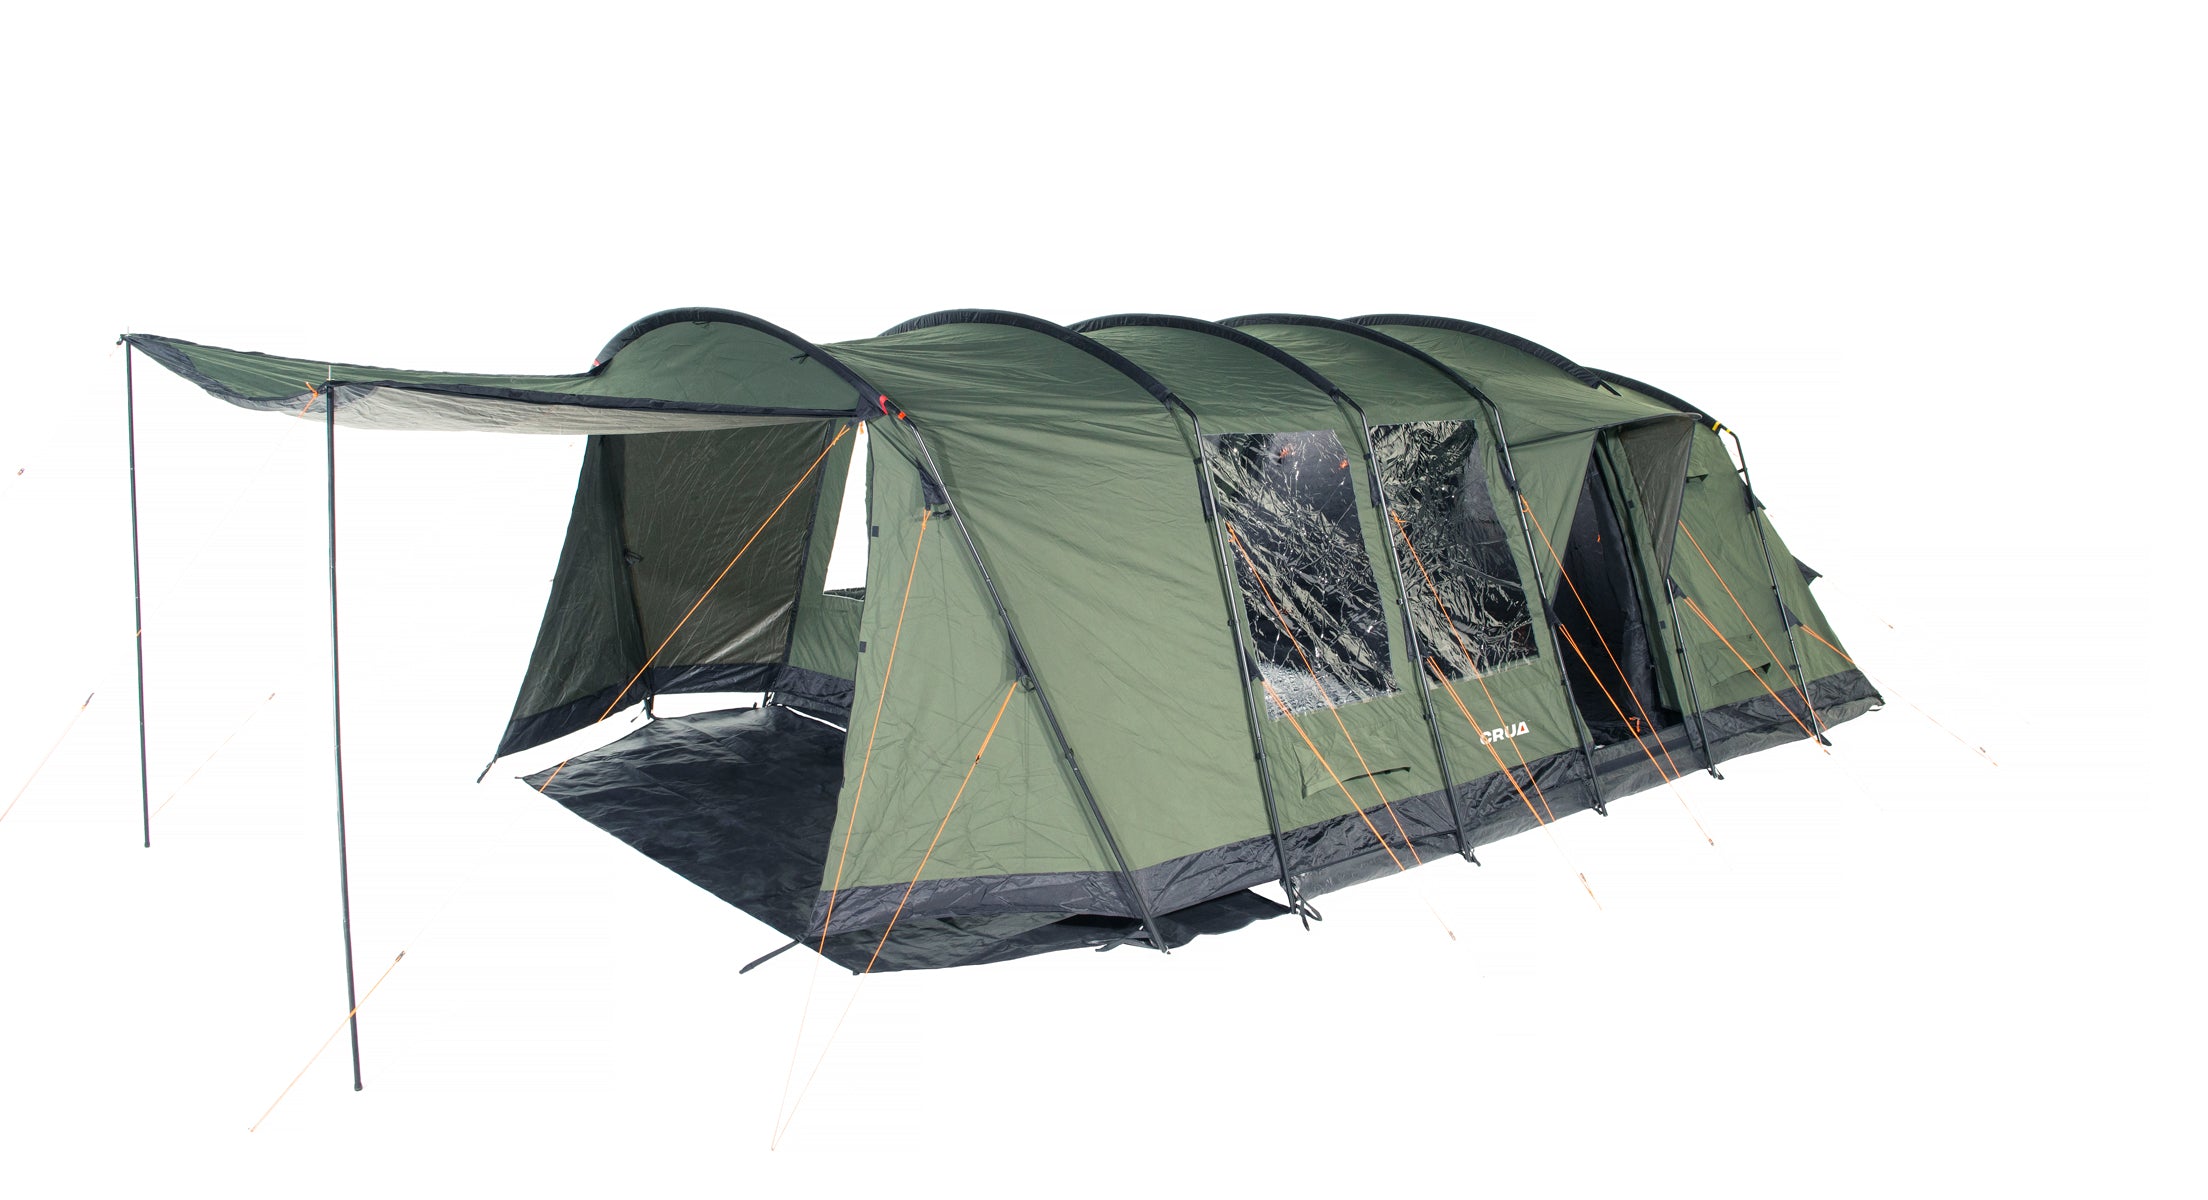 LOJ | 6 PERSON INSULATED TUNNEL TENT - ALL WEATHER COMPATIBLE, WATERPROOF, SPACIOUS SHELTER WITH ENHANCED COMFORT AND DURABILITY